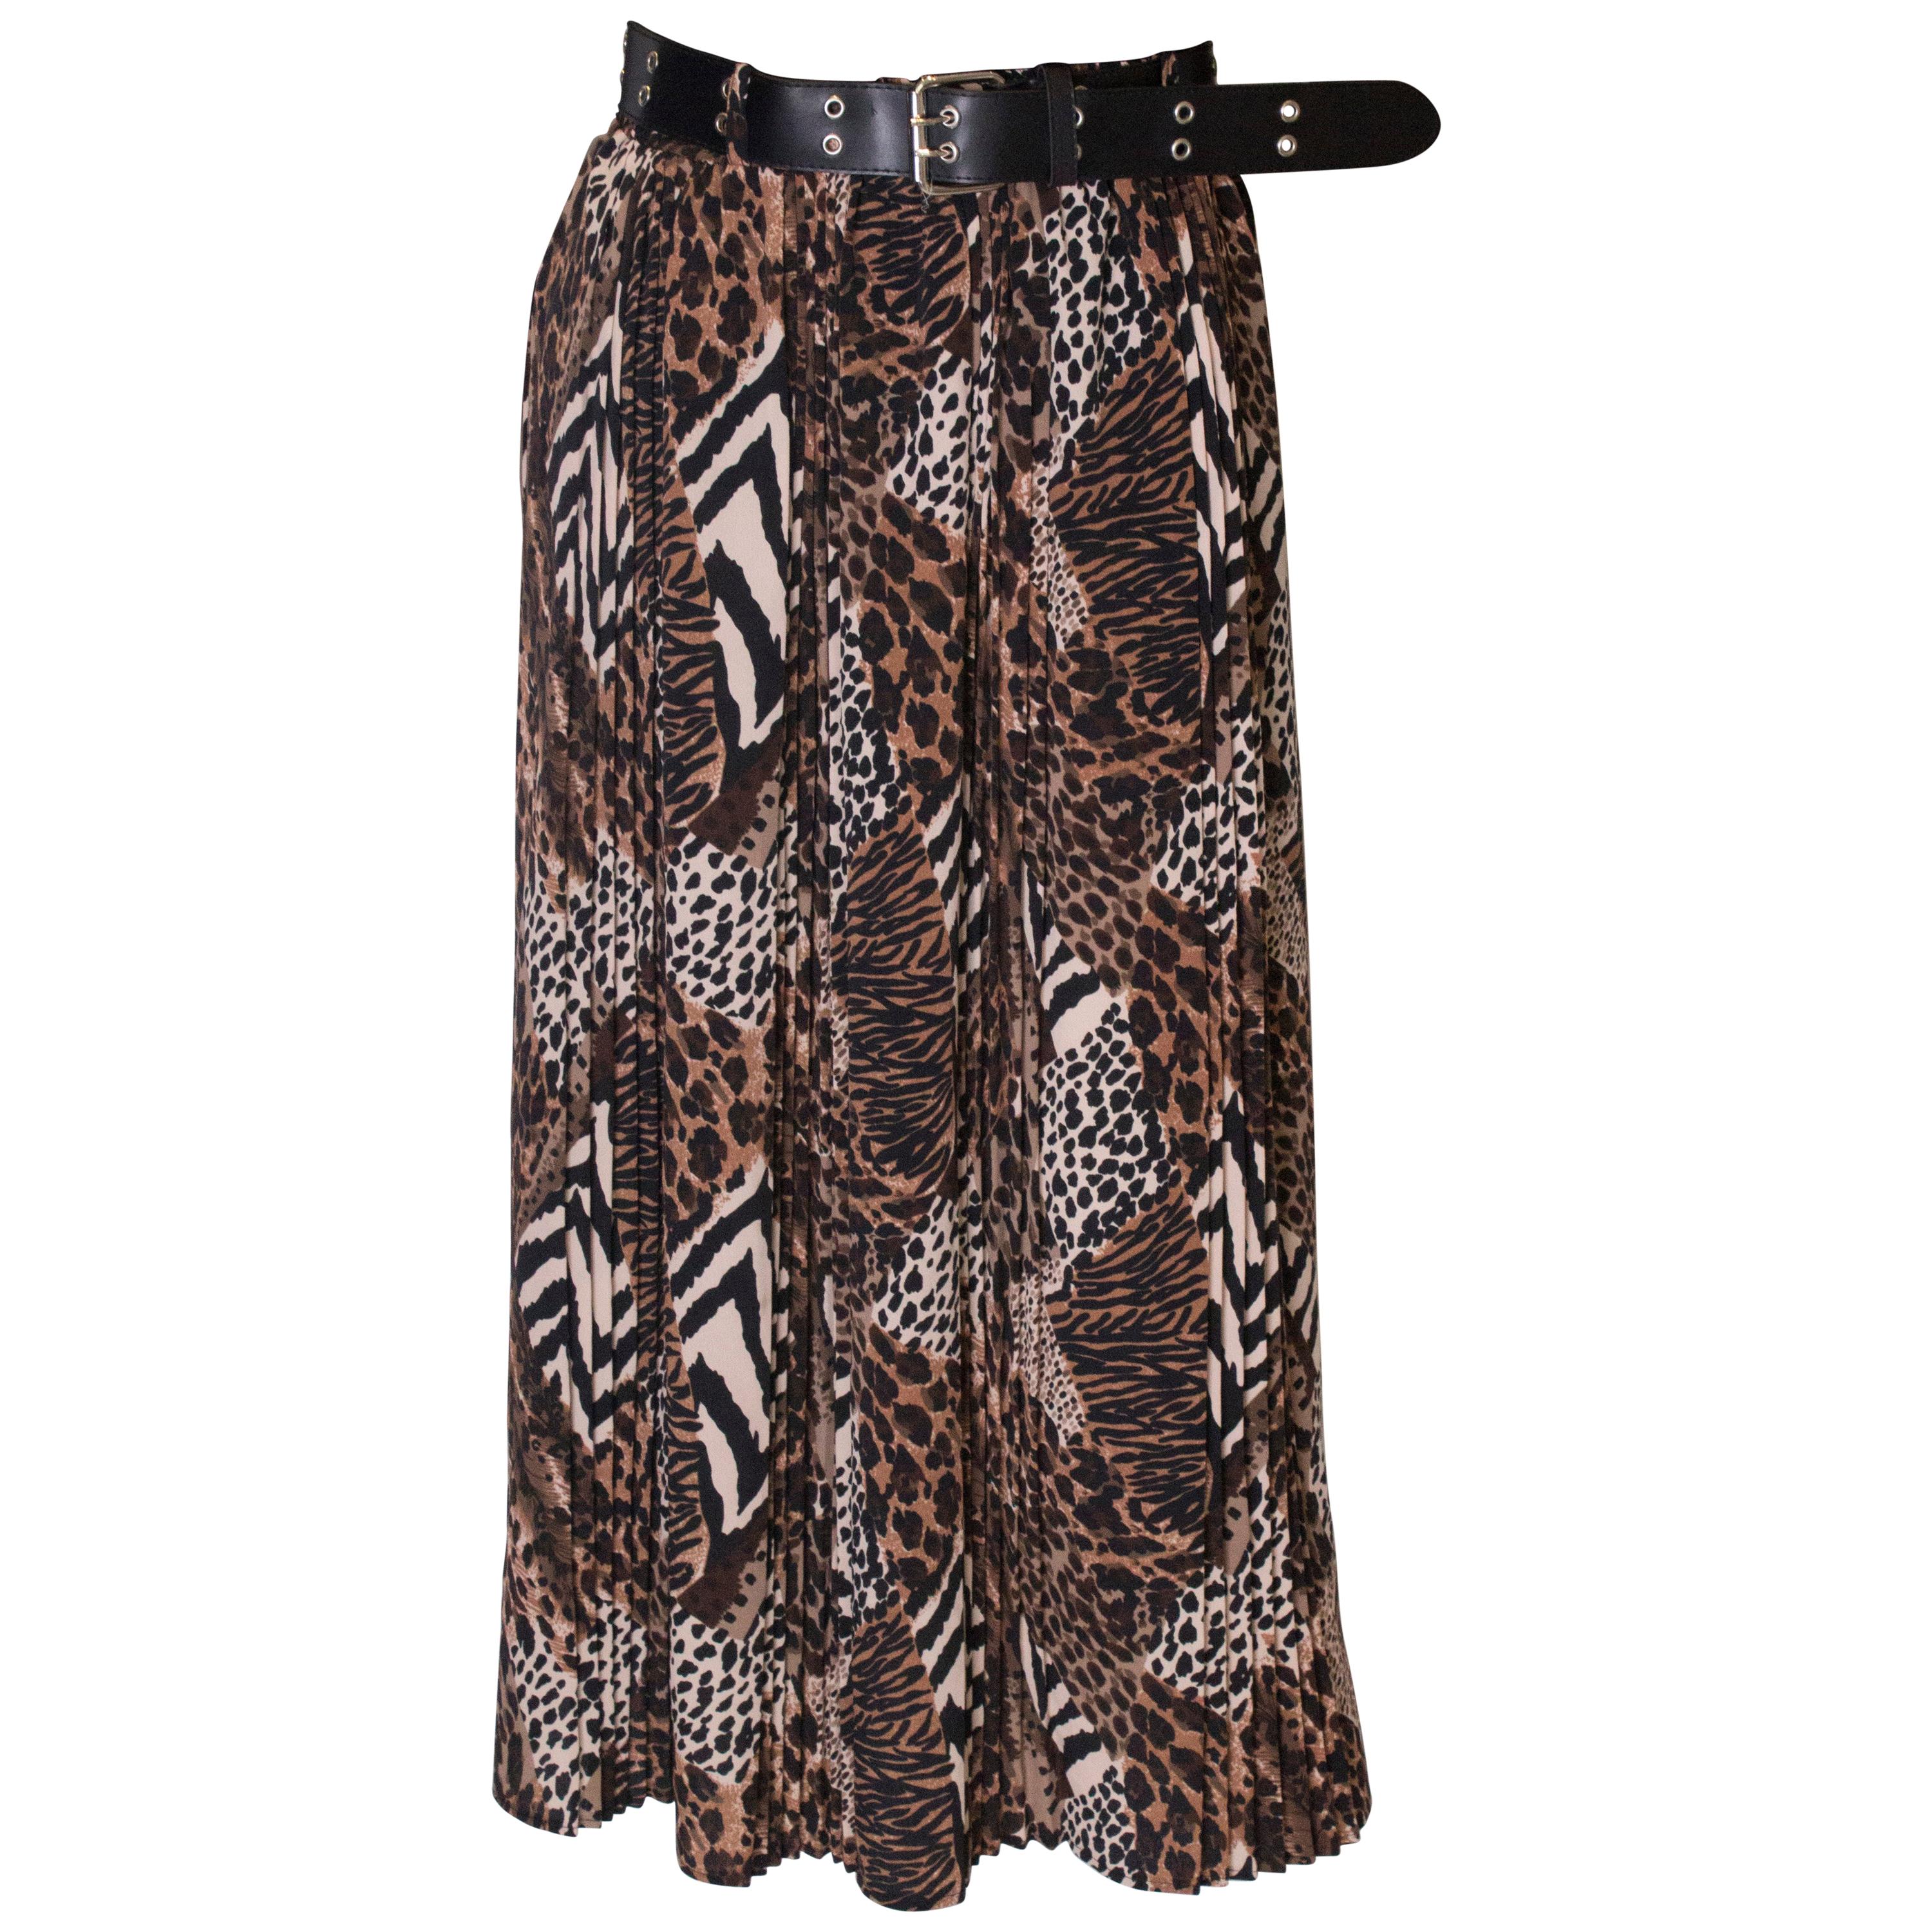 Vintage Leopard Print Skirt with Pleats For Sale